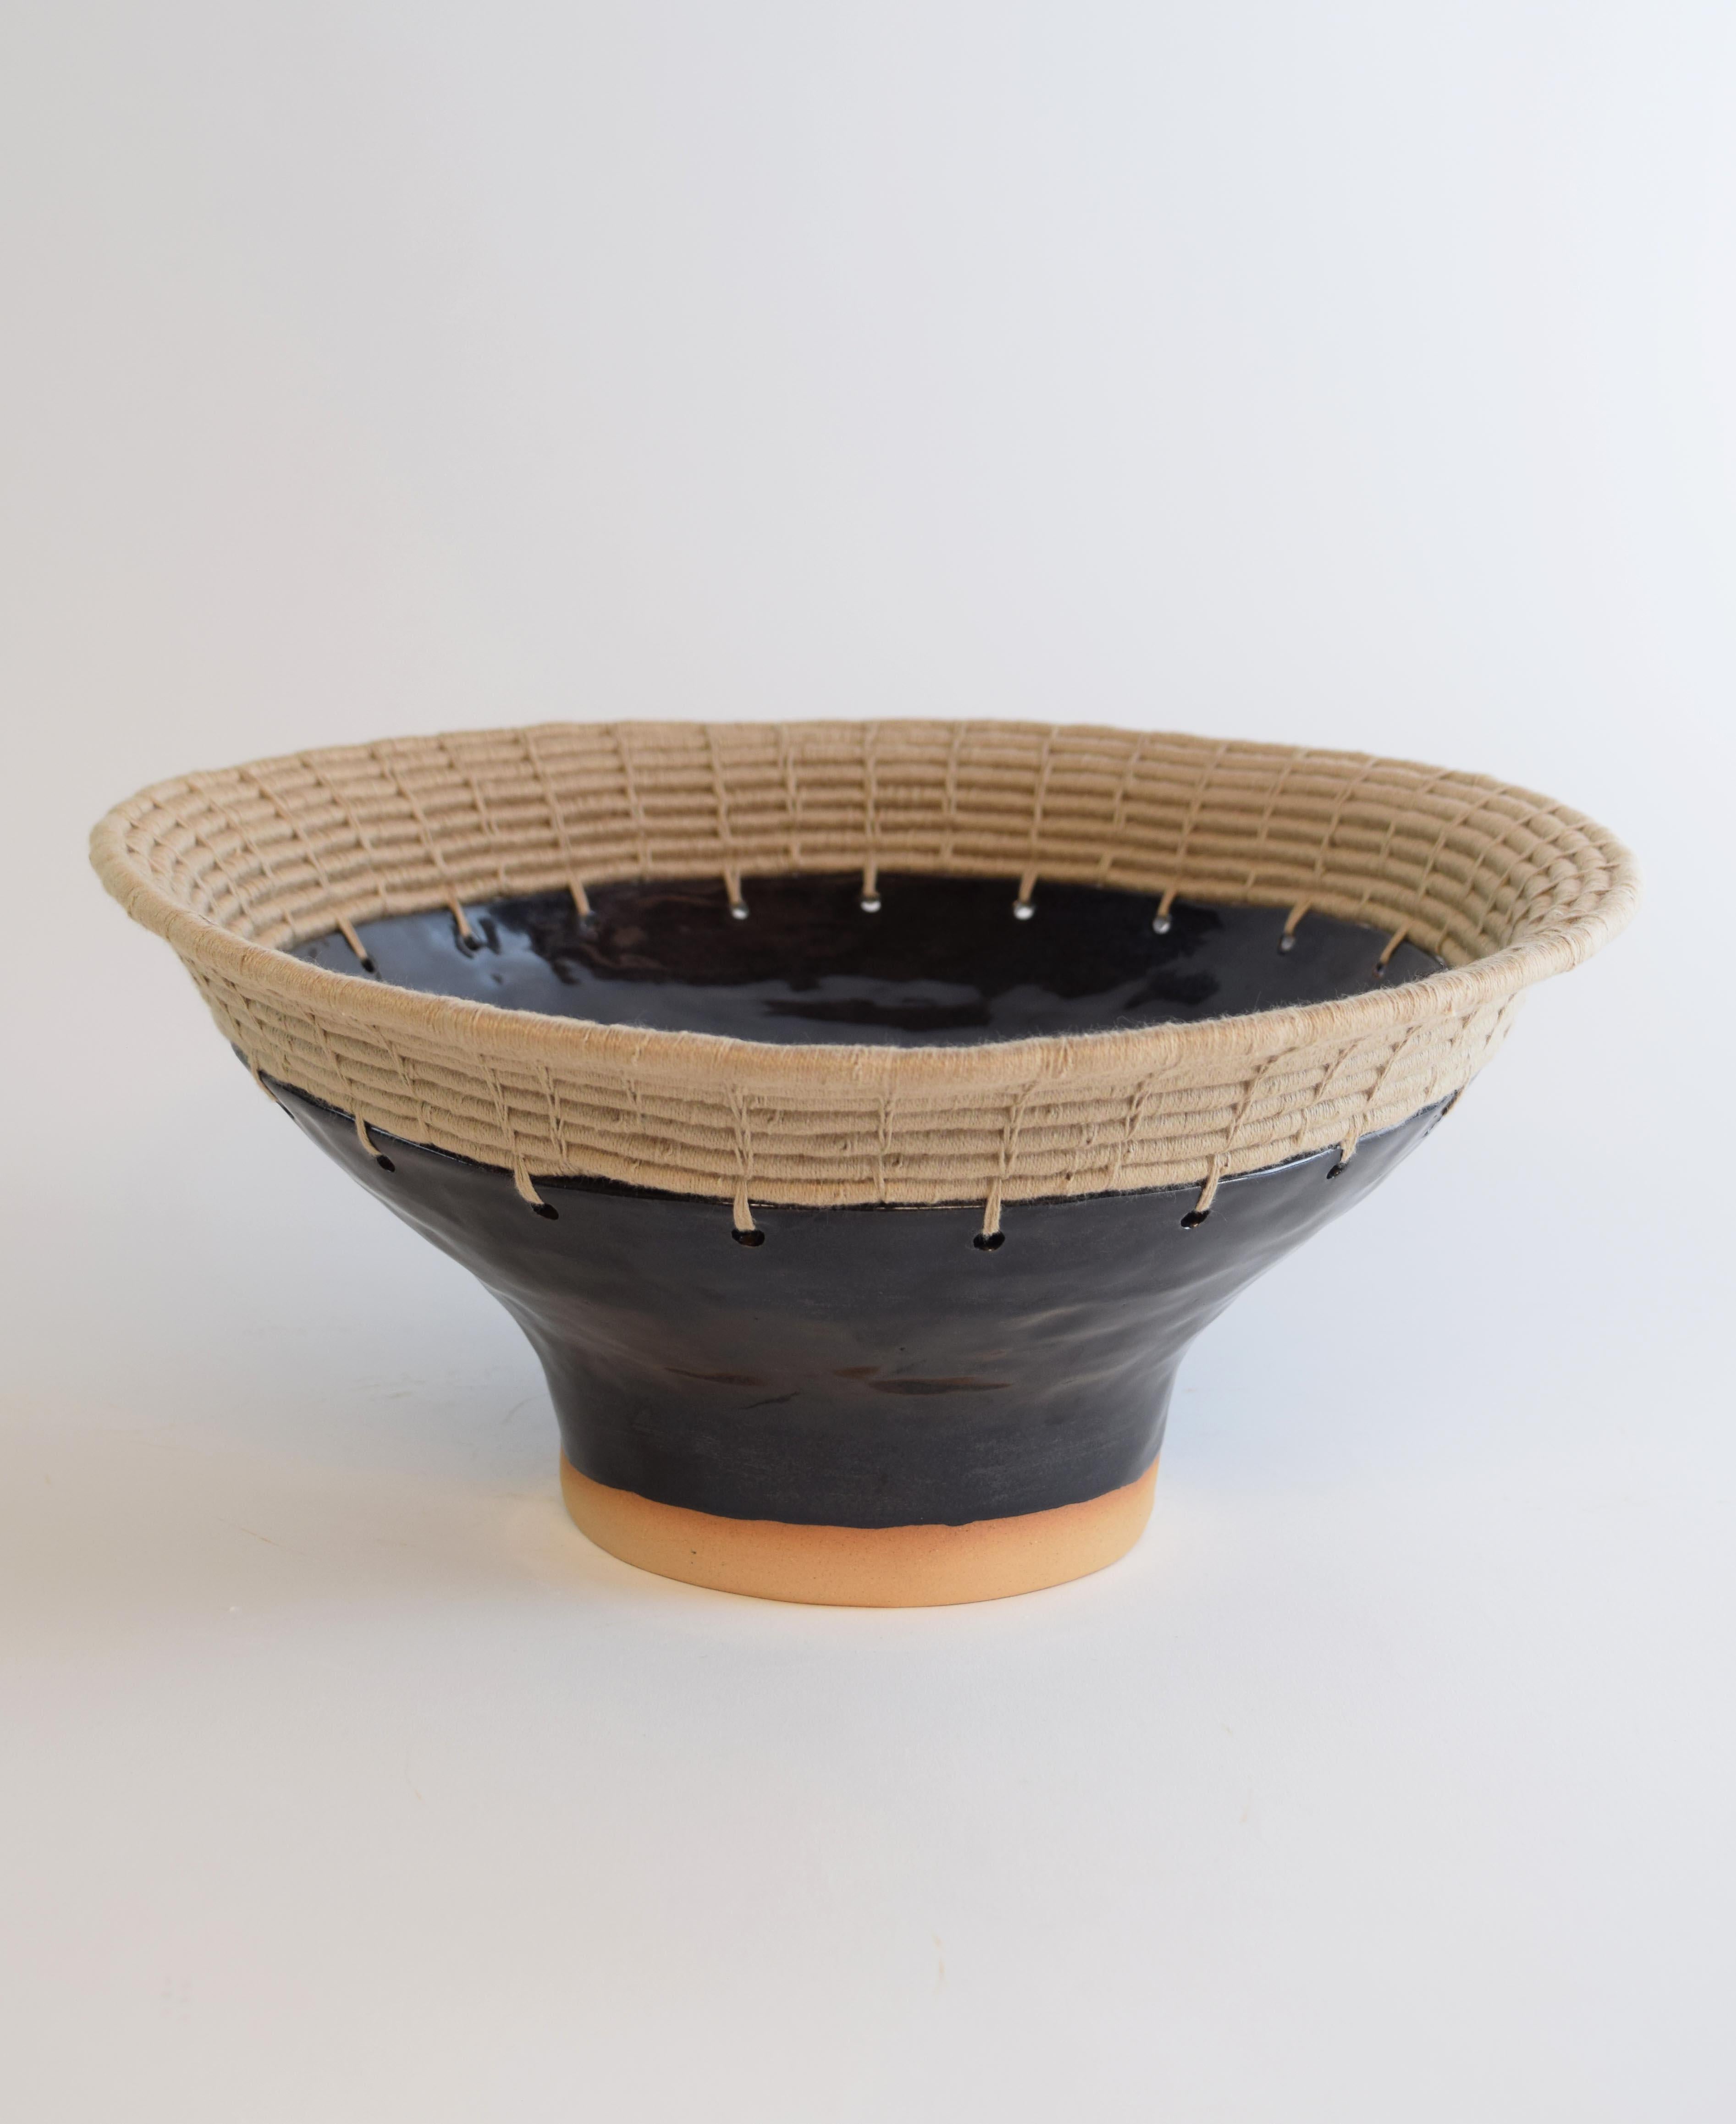 Decorative bowl #778 by Karen Gayle Tinney

Hand formed stoneware bowl with black glaze. The bowl has an asymmetrical shape and will look different from each side. Woven tan cotton edge detail. For decorative use only.

Measures: 13”W x